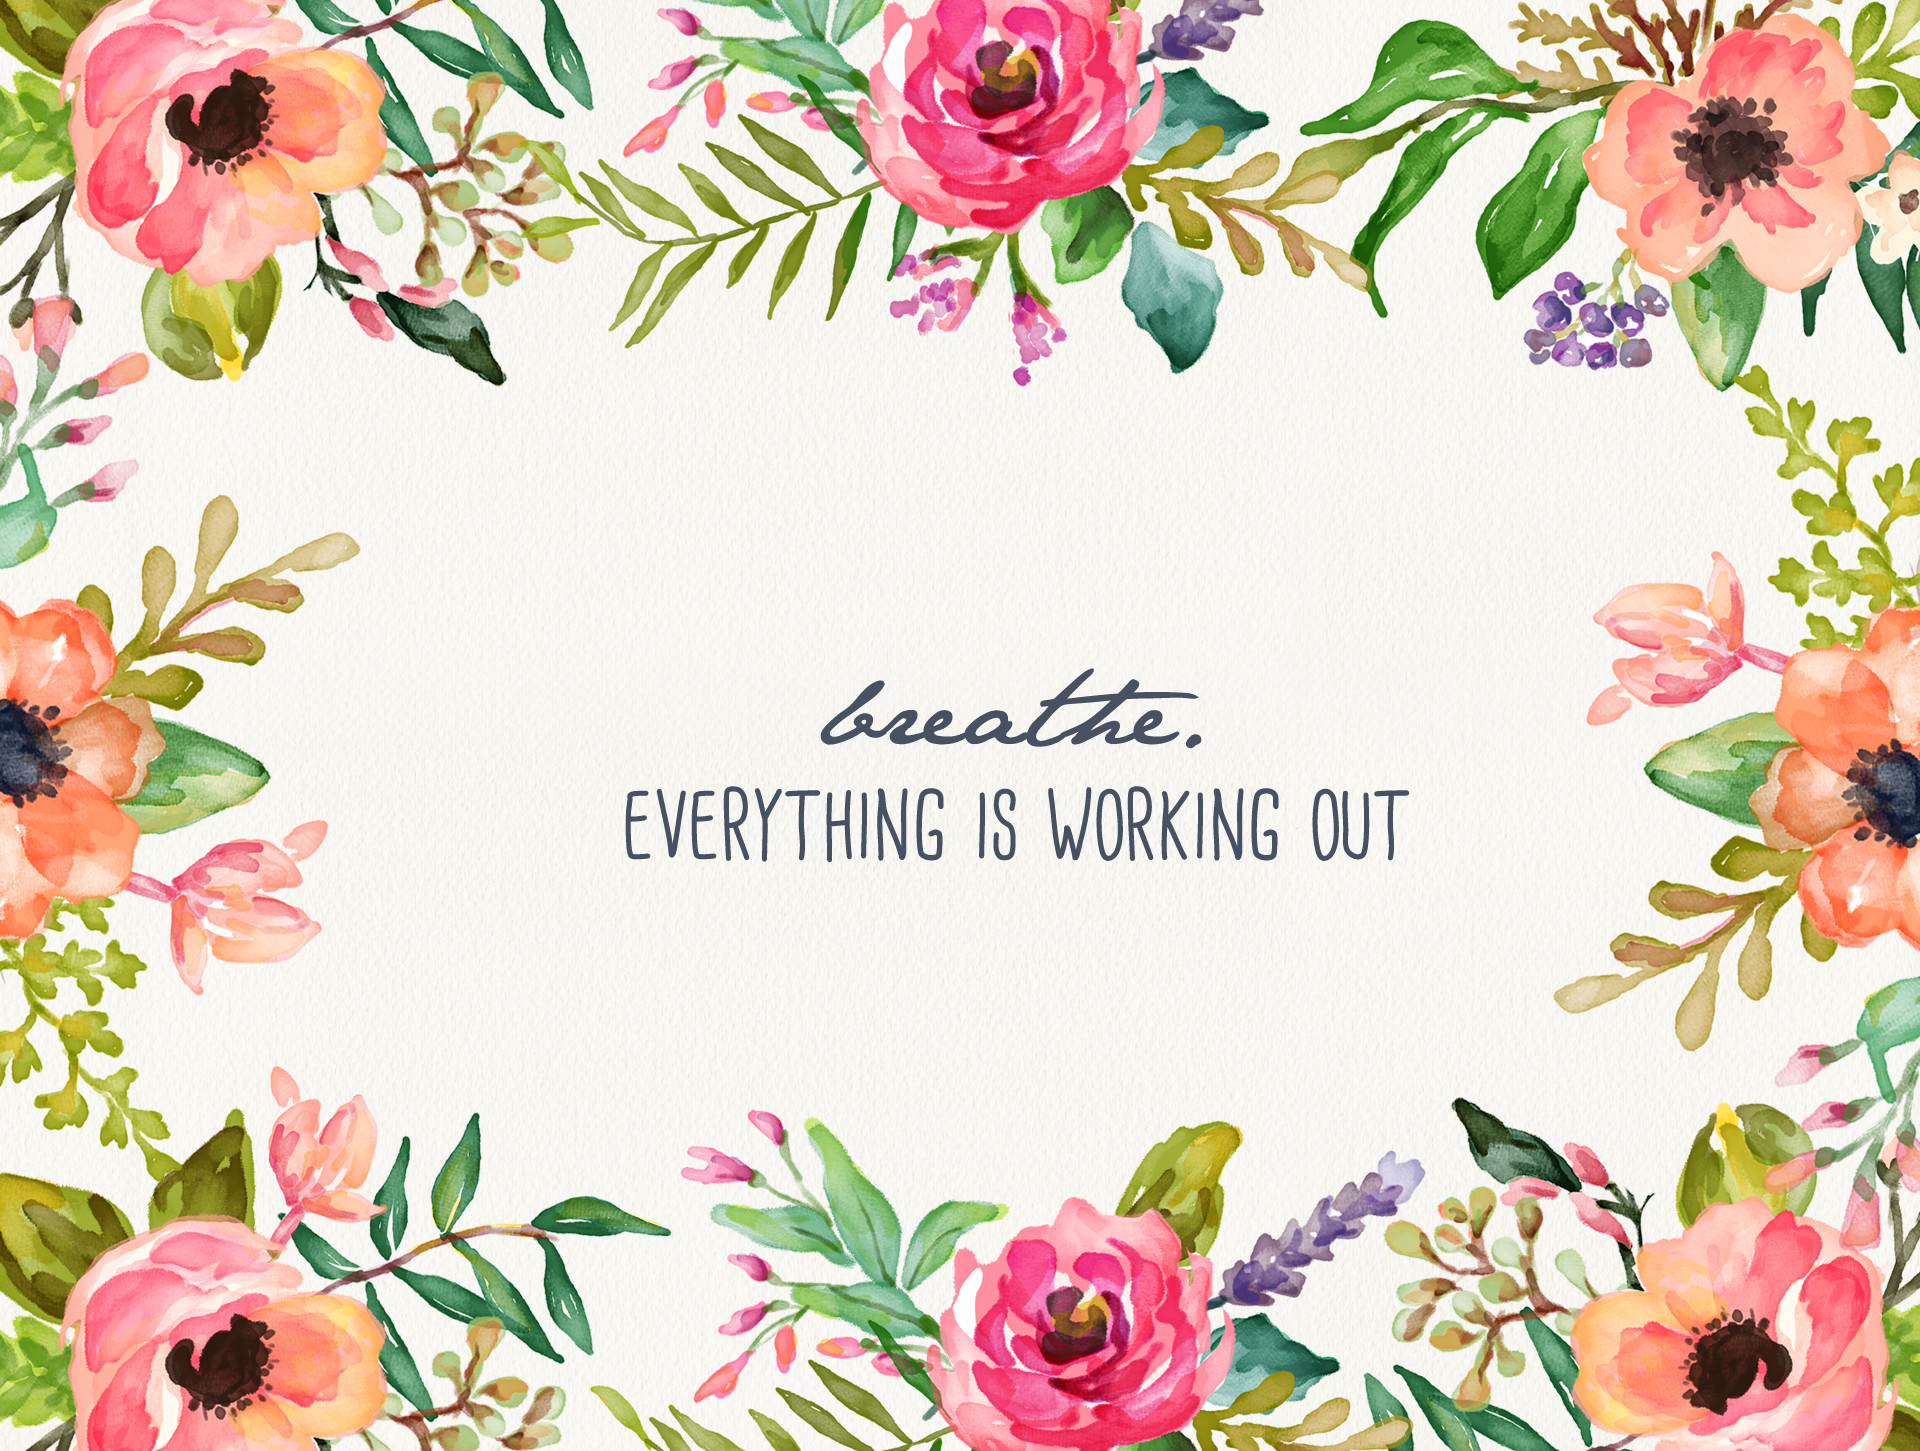 1920x1451 Breathe - Floral Desktop Wallpaper - Inspired by Beatrice Clay - Wallpaper  Zone